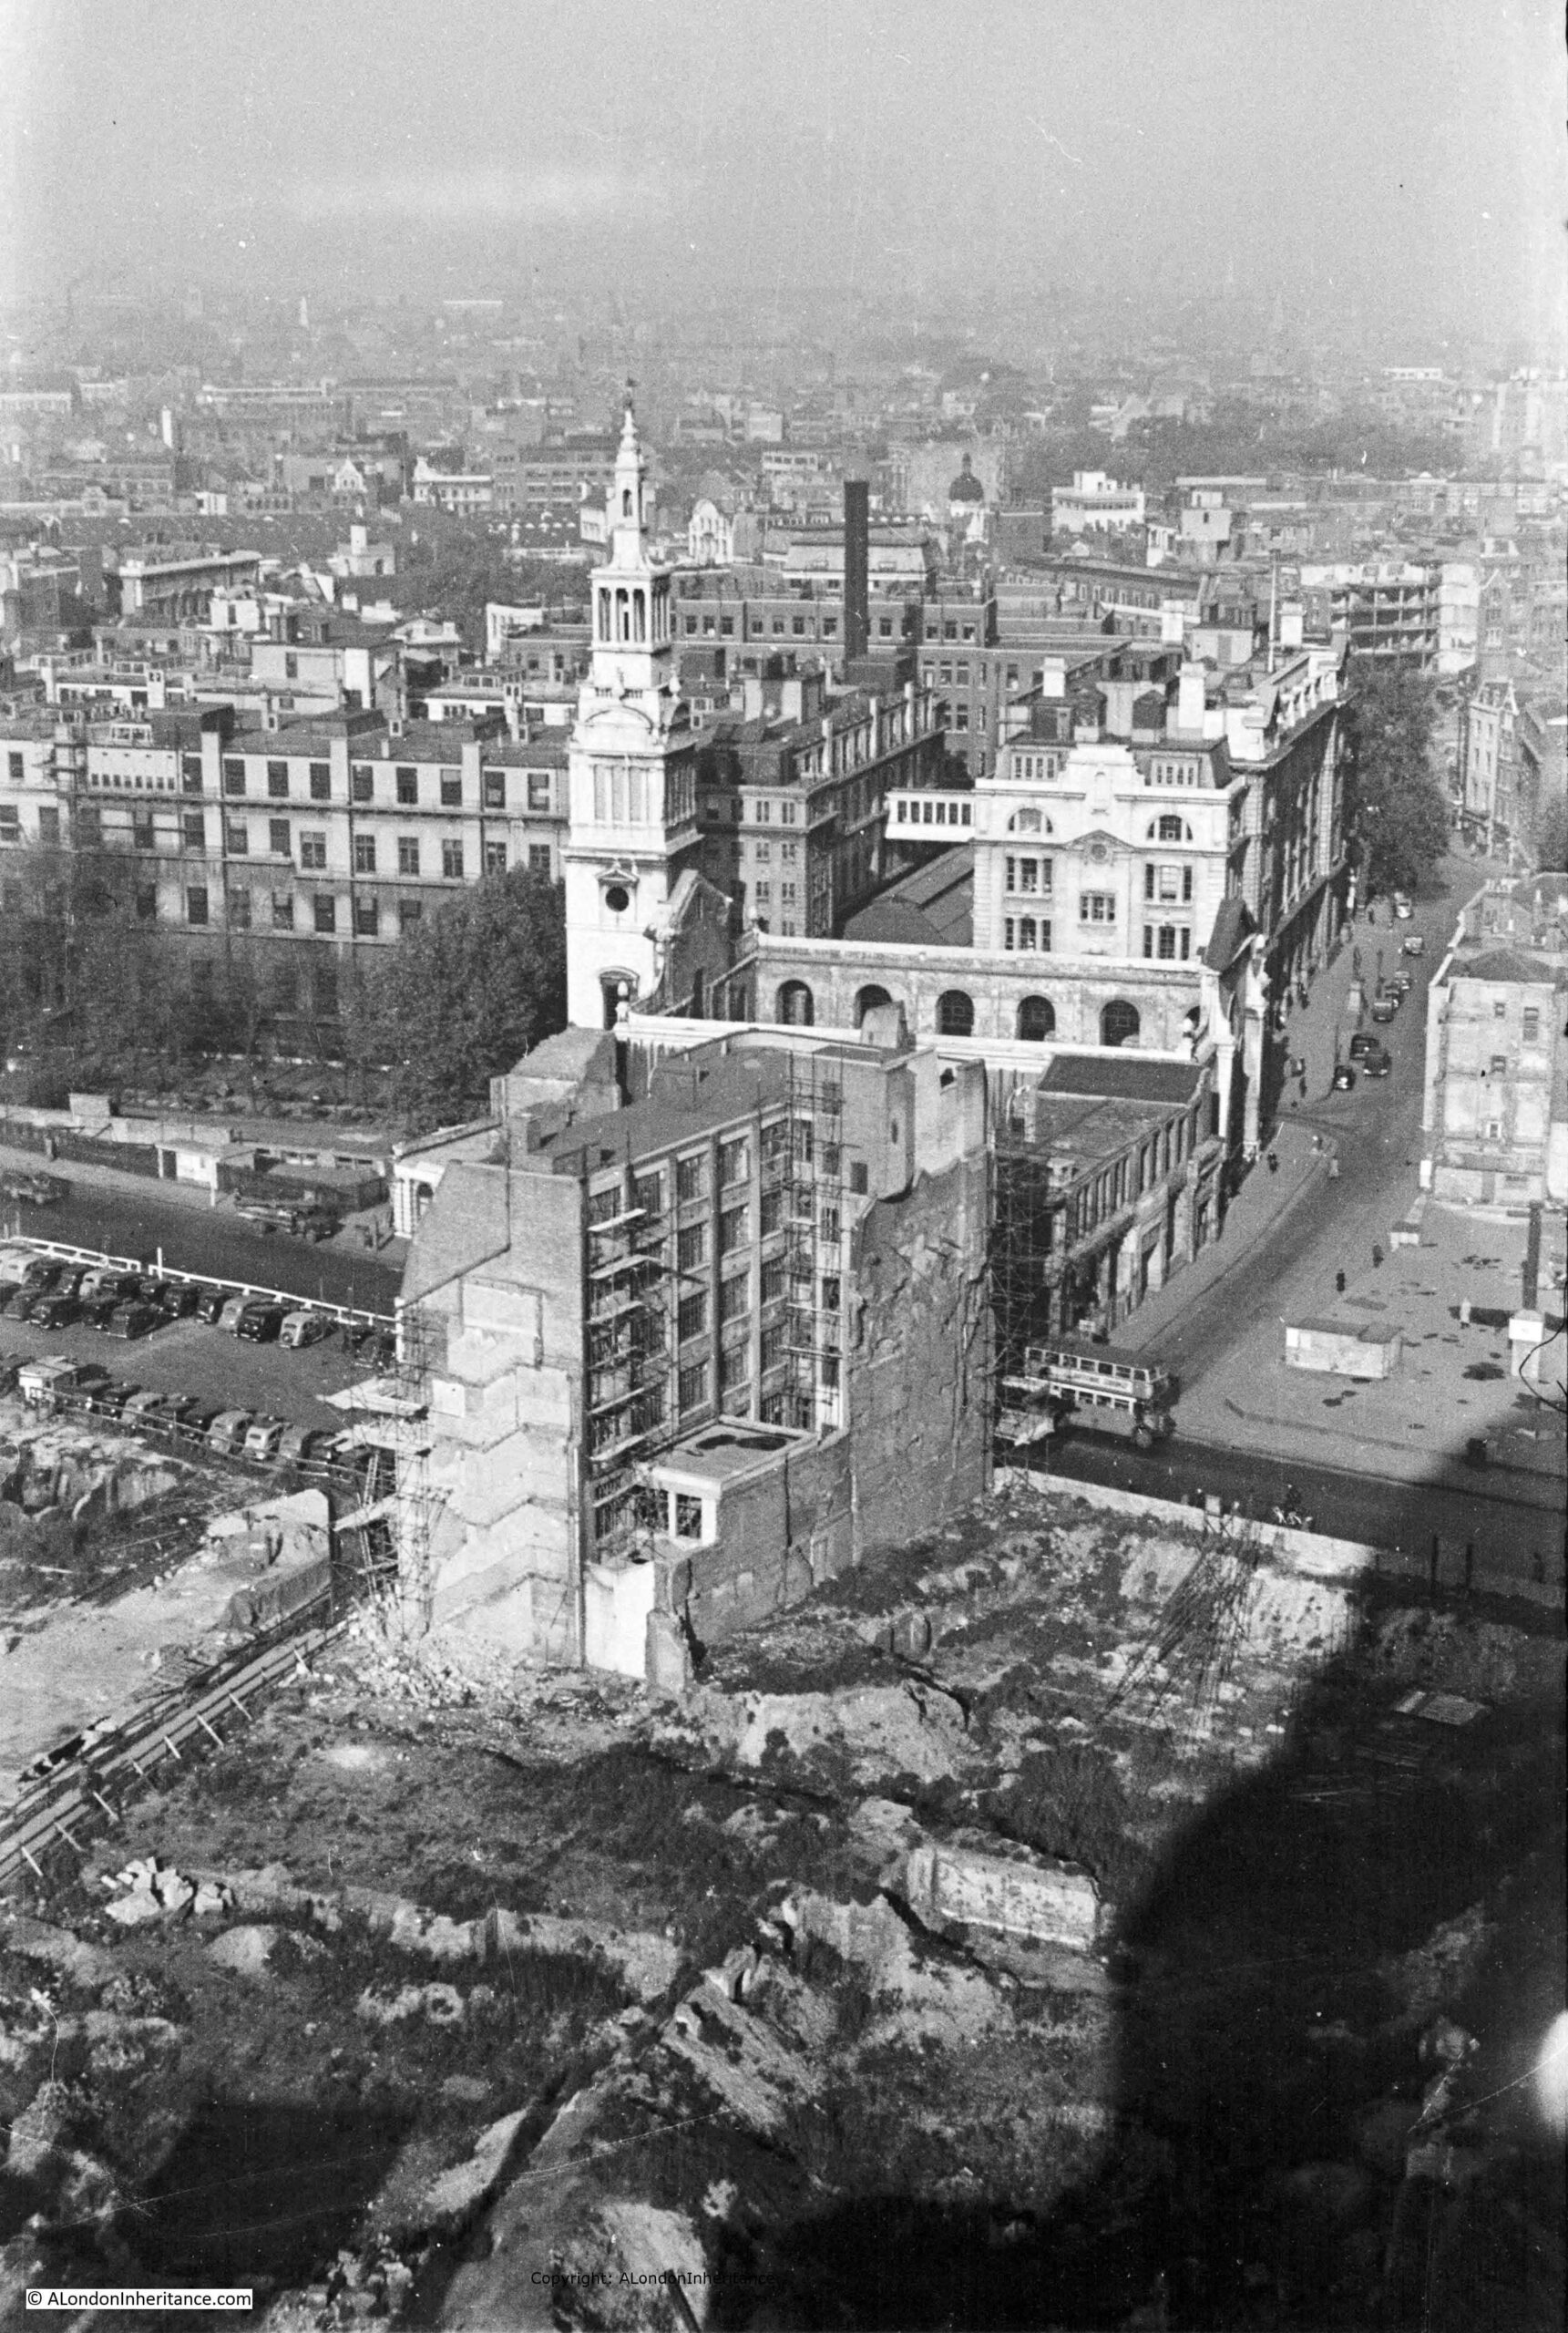 View from St Paul's of bombed landscape